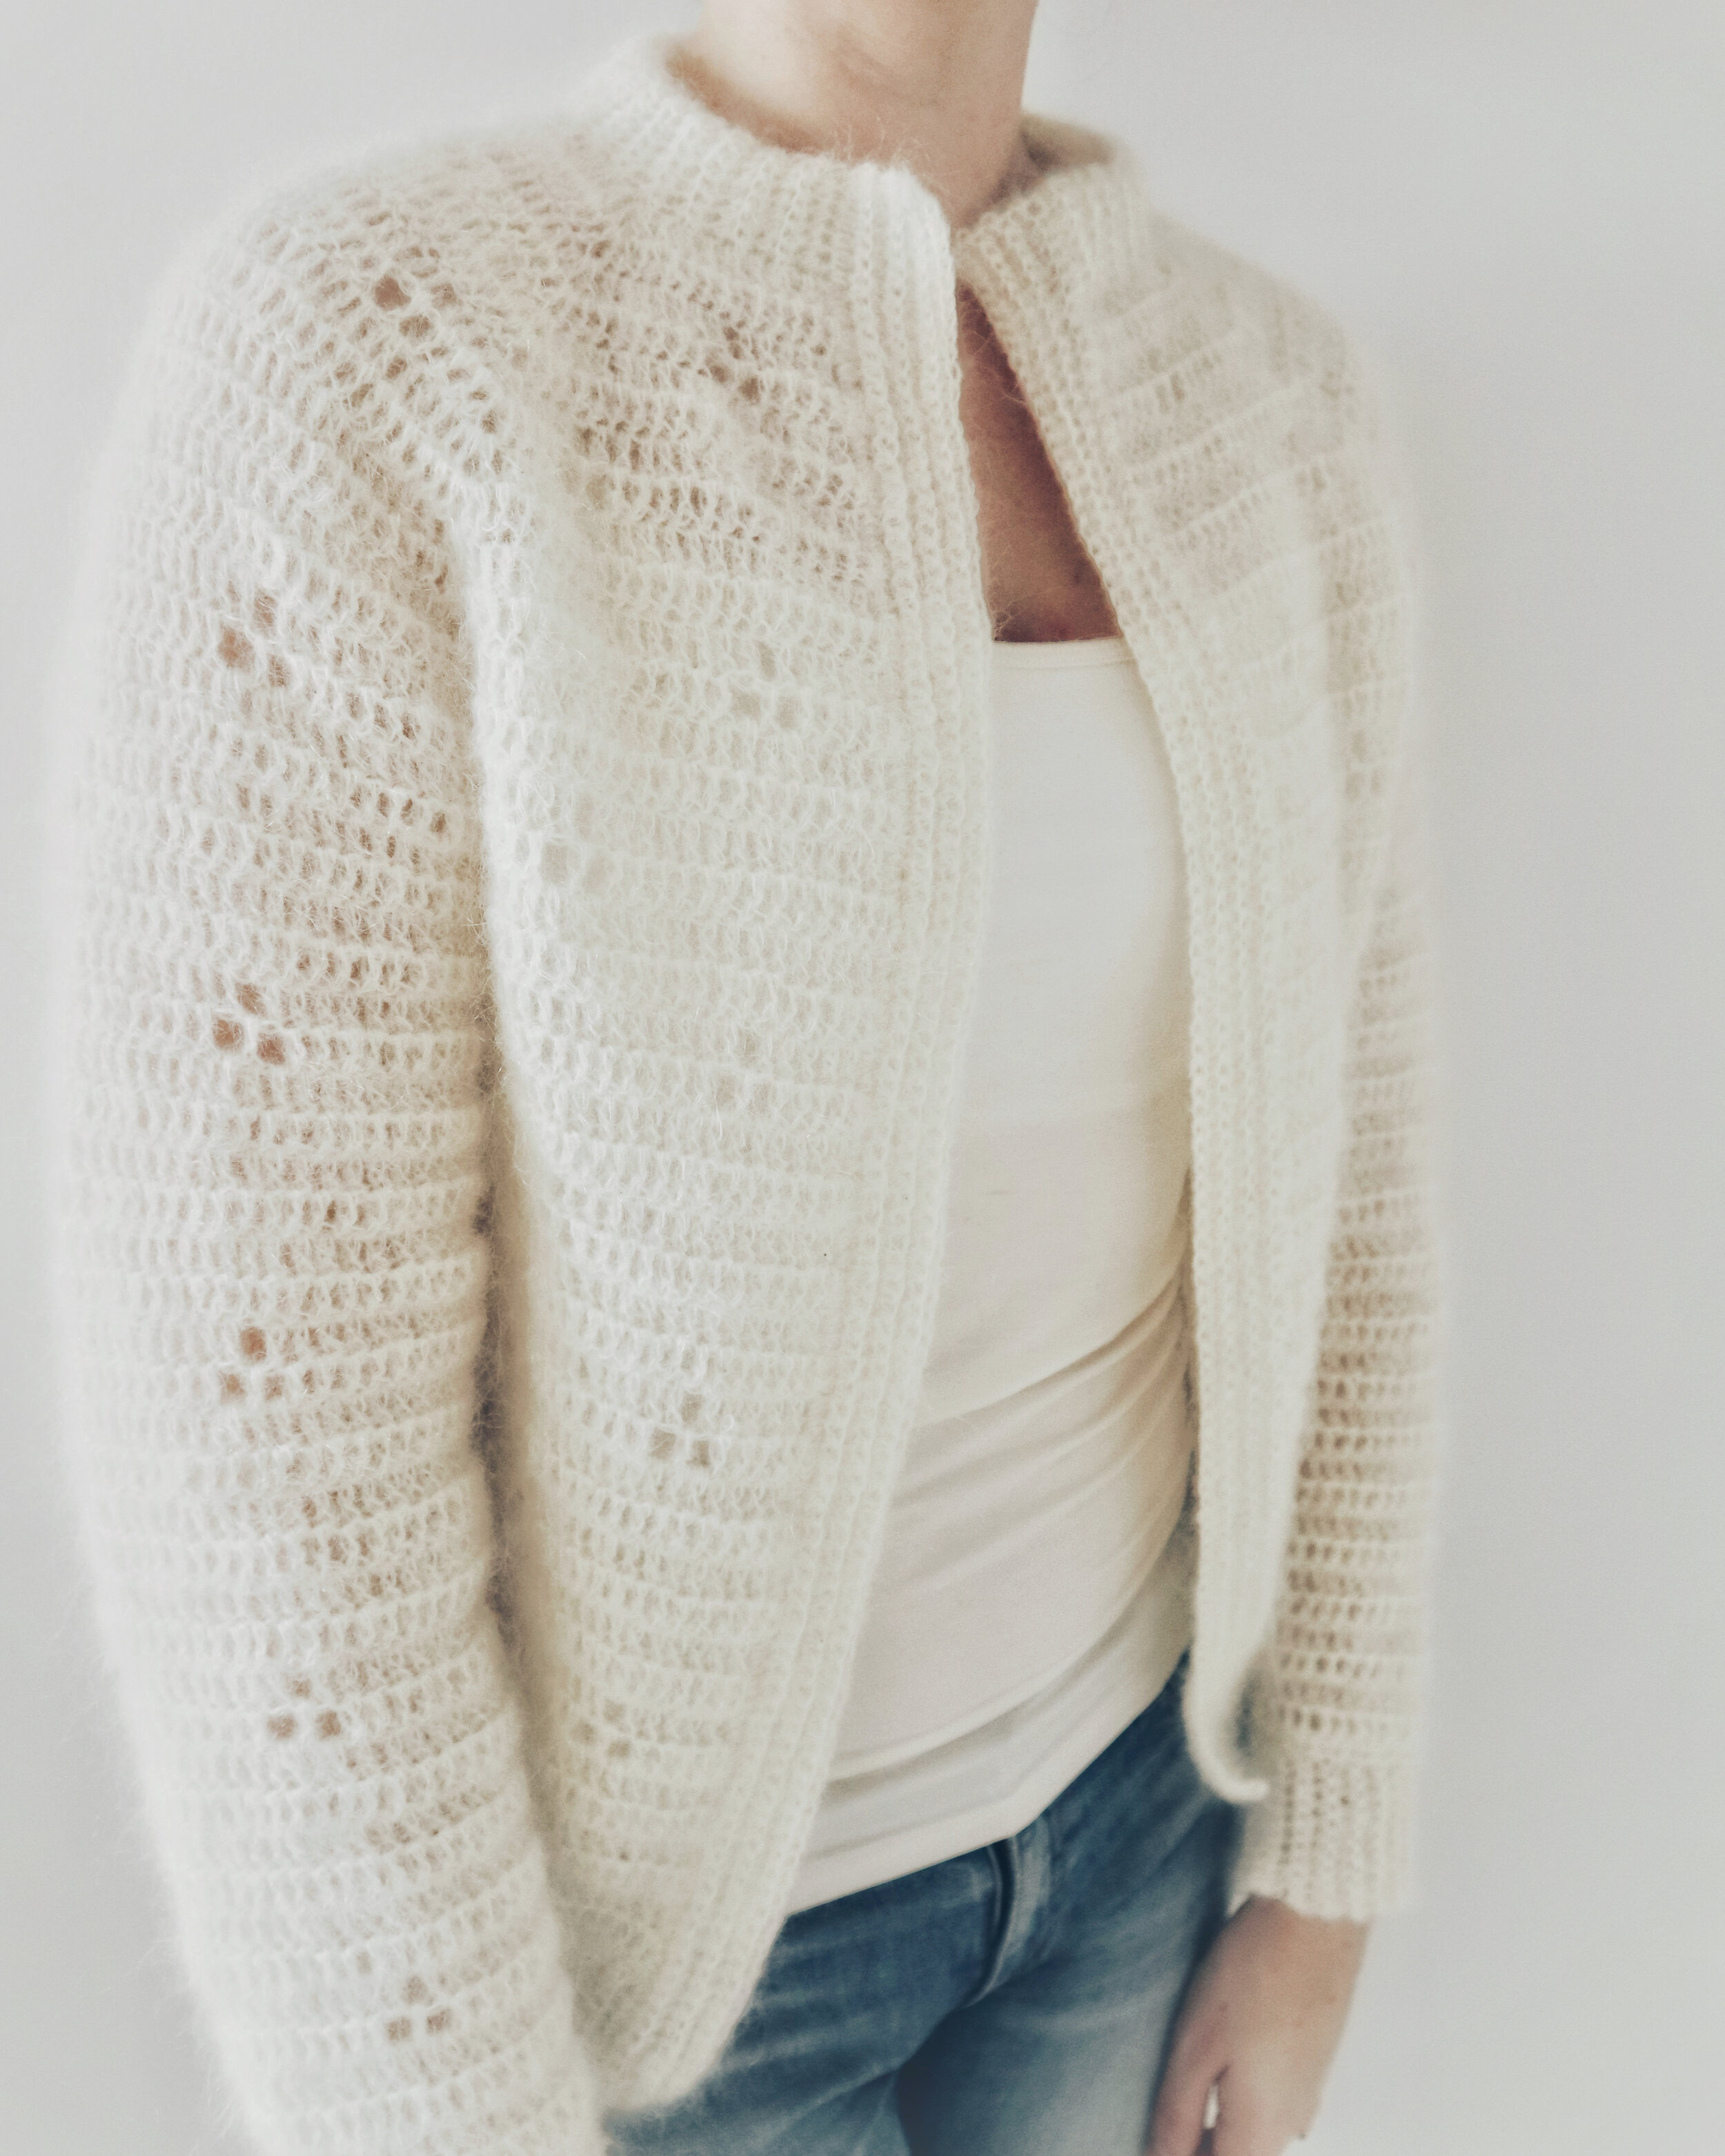 How to frog mohair + mohair cardigan crochet pattern — Coffee